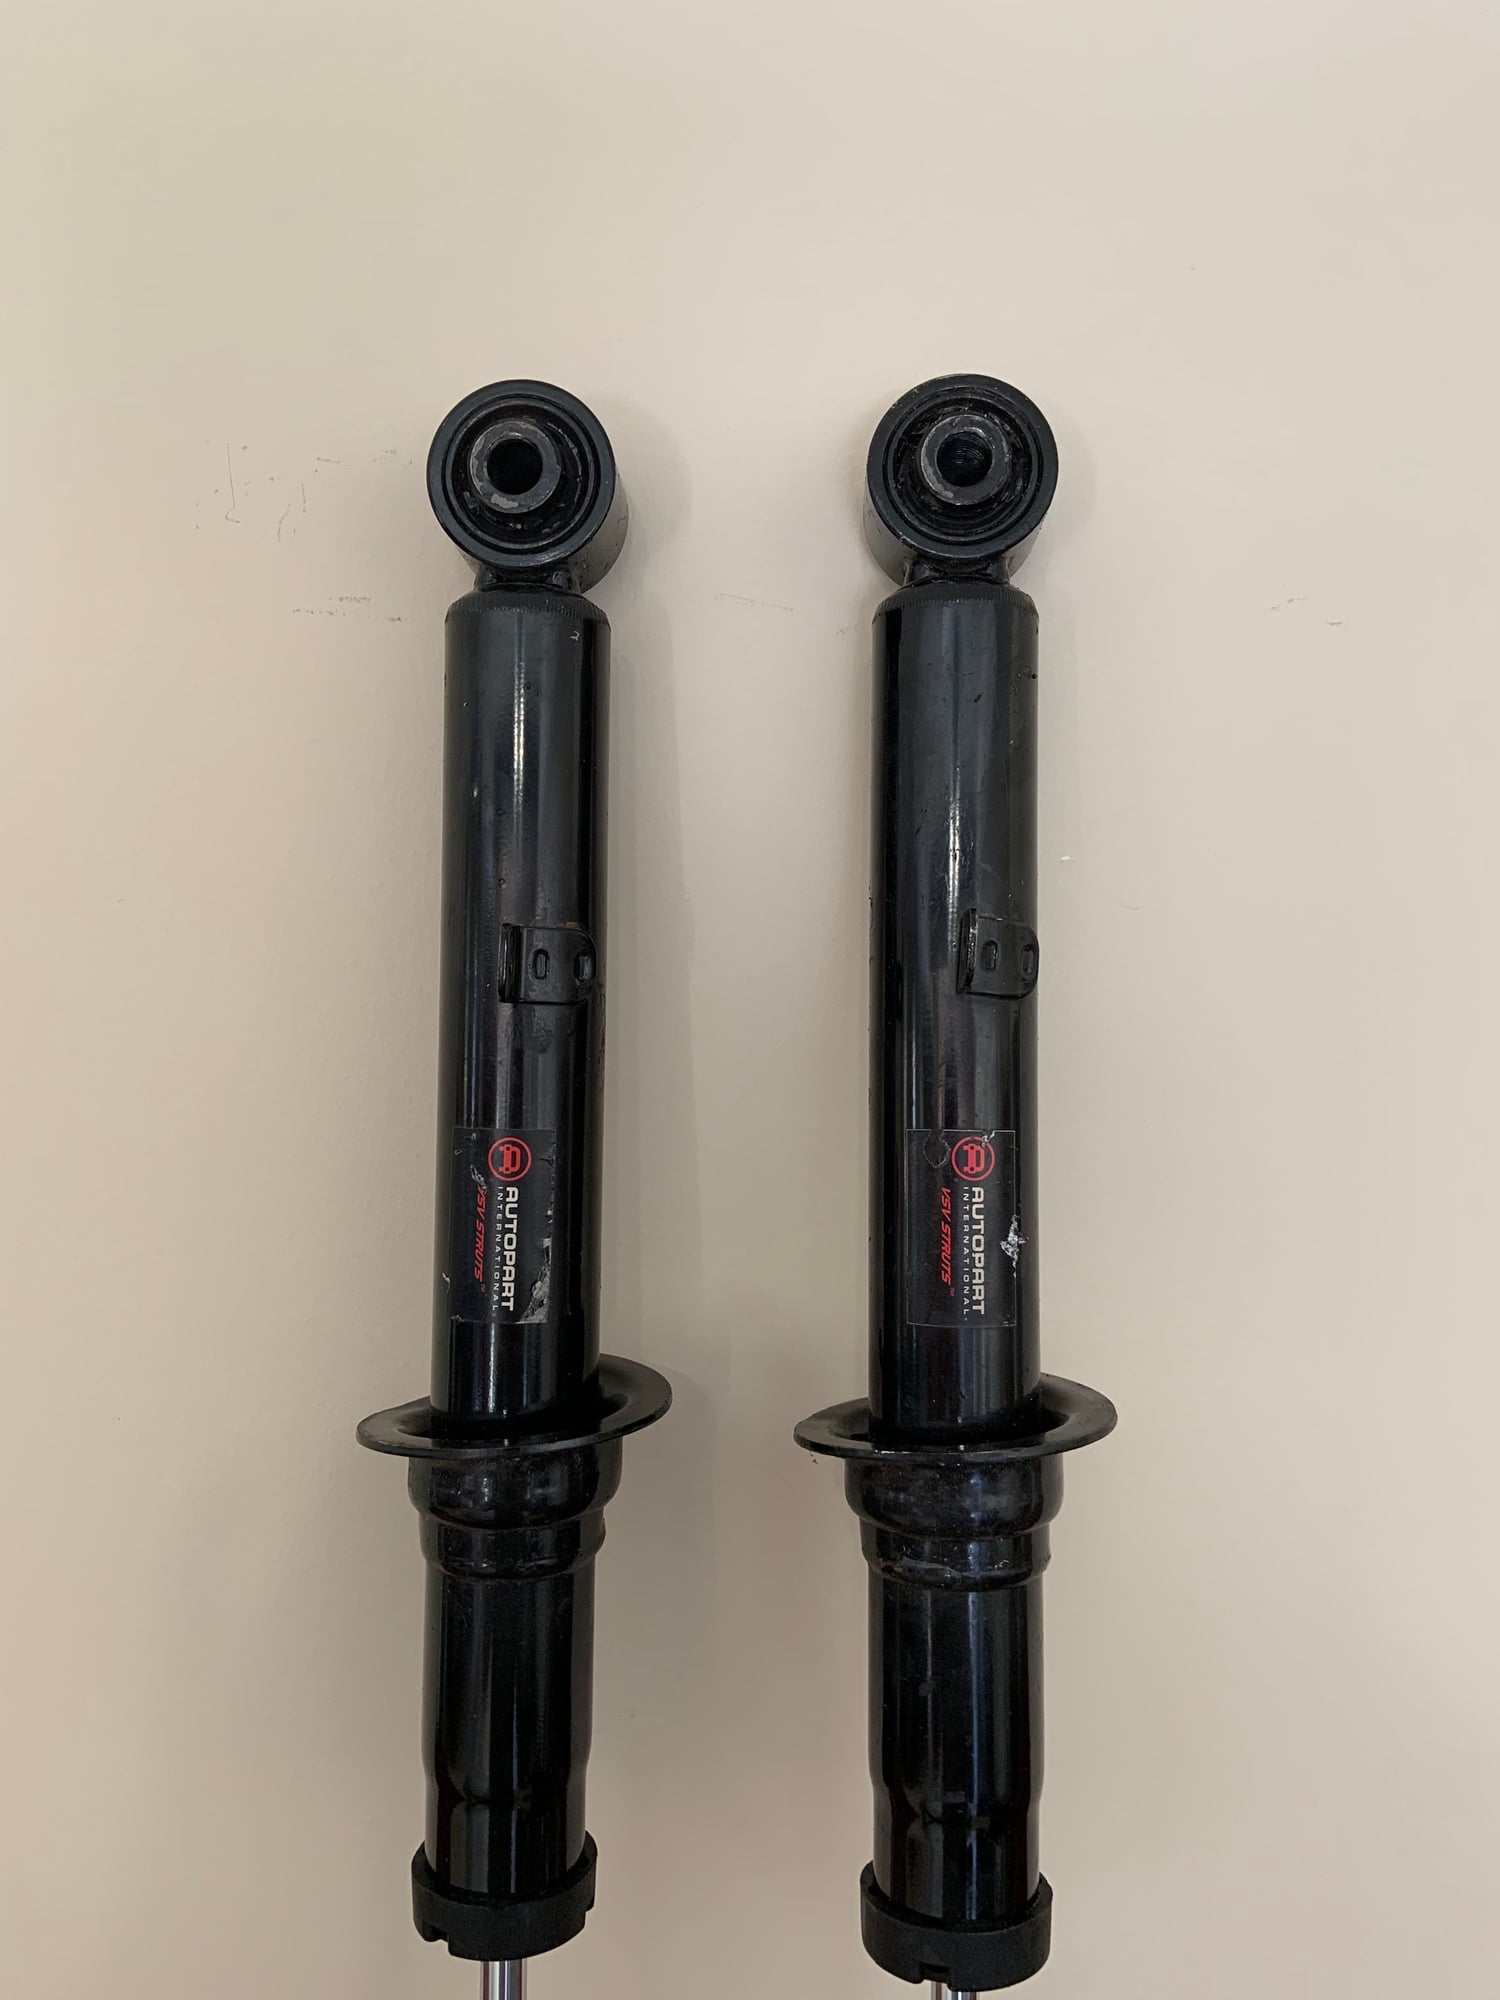 Steering/Suspension - Struts and lower control arm/ball joints for SC430 - Used - 2004 to 2012 Lexus SC430 - Atlanta, GA 30301, United States